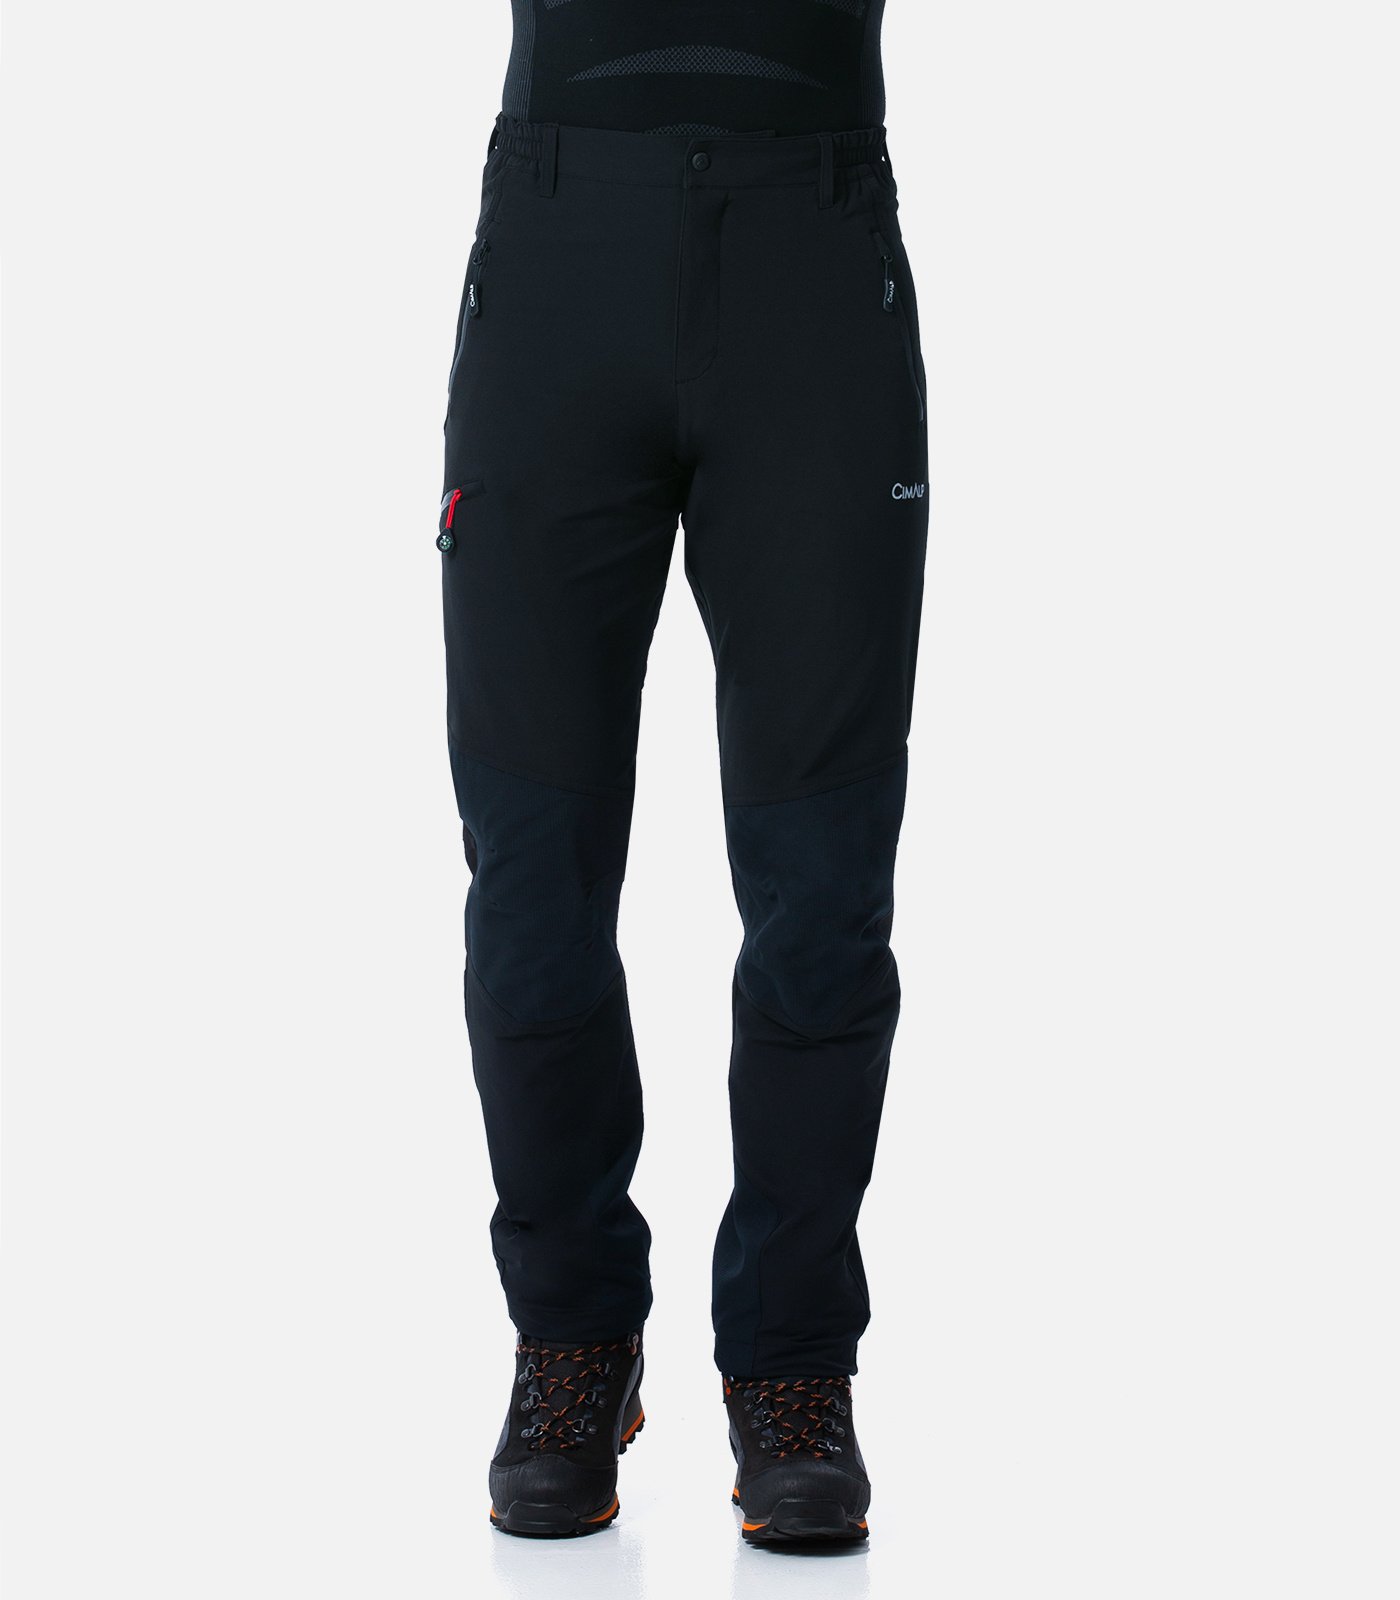 Stretch & reinforced mountain trousers